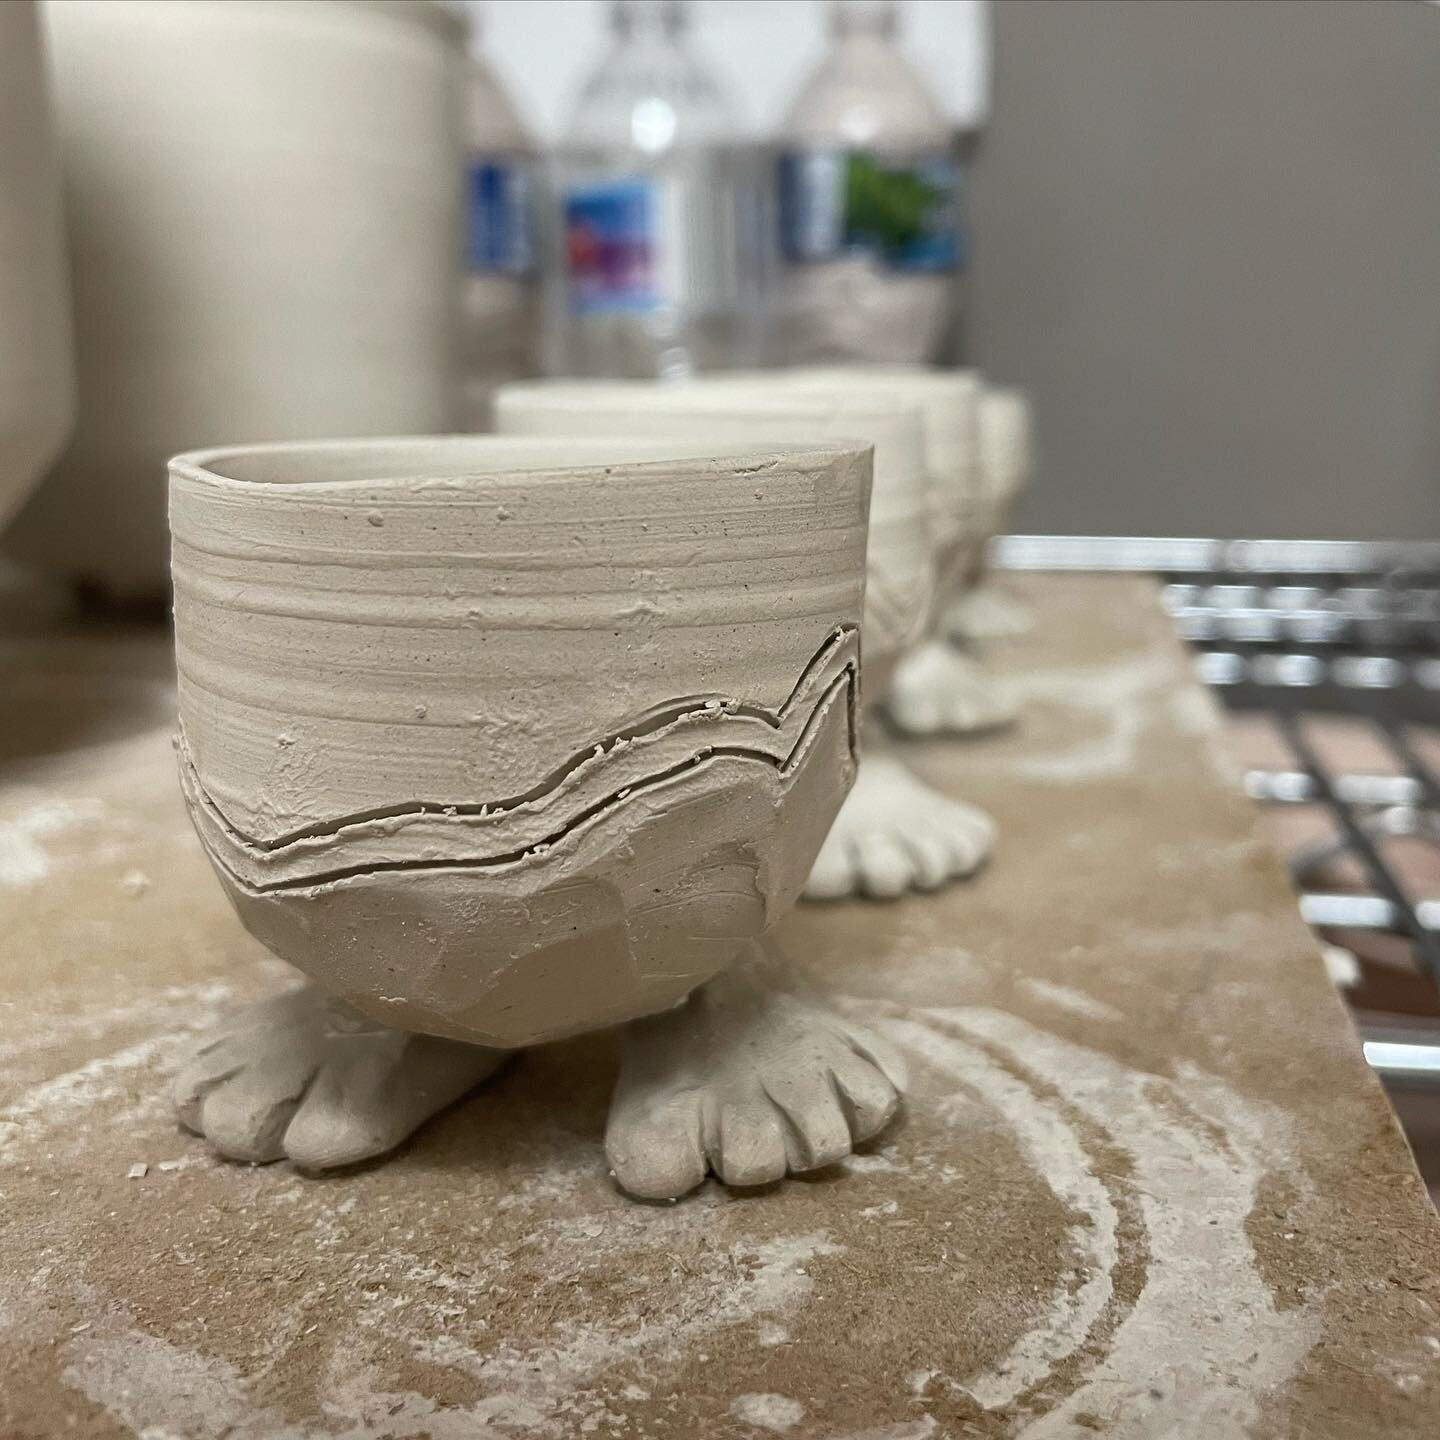 Little man lineup, complete with pants.  Asymmetrical pants, because they&rsquo;re fashion-forward.
Just unloaded a bisque kiln, gonna do a bunch of glazing to finish the week!
#kiln #greenware #pottery #potter #art #artist #ceramics #clay